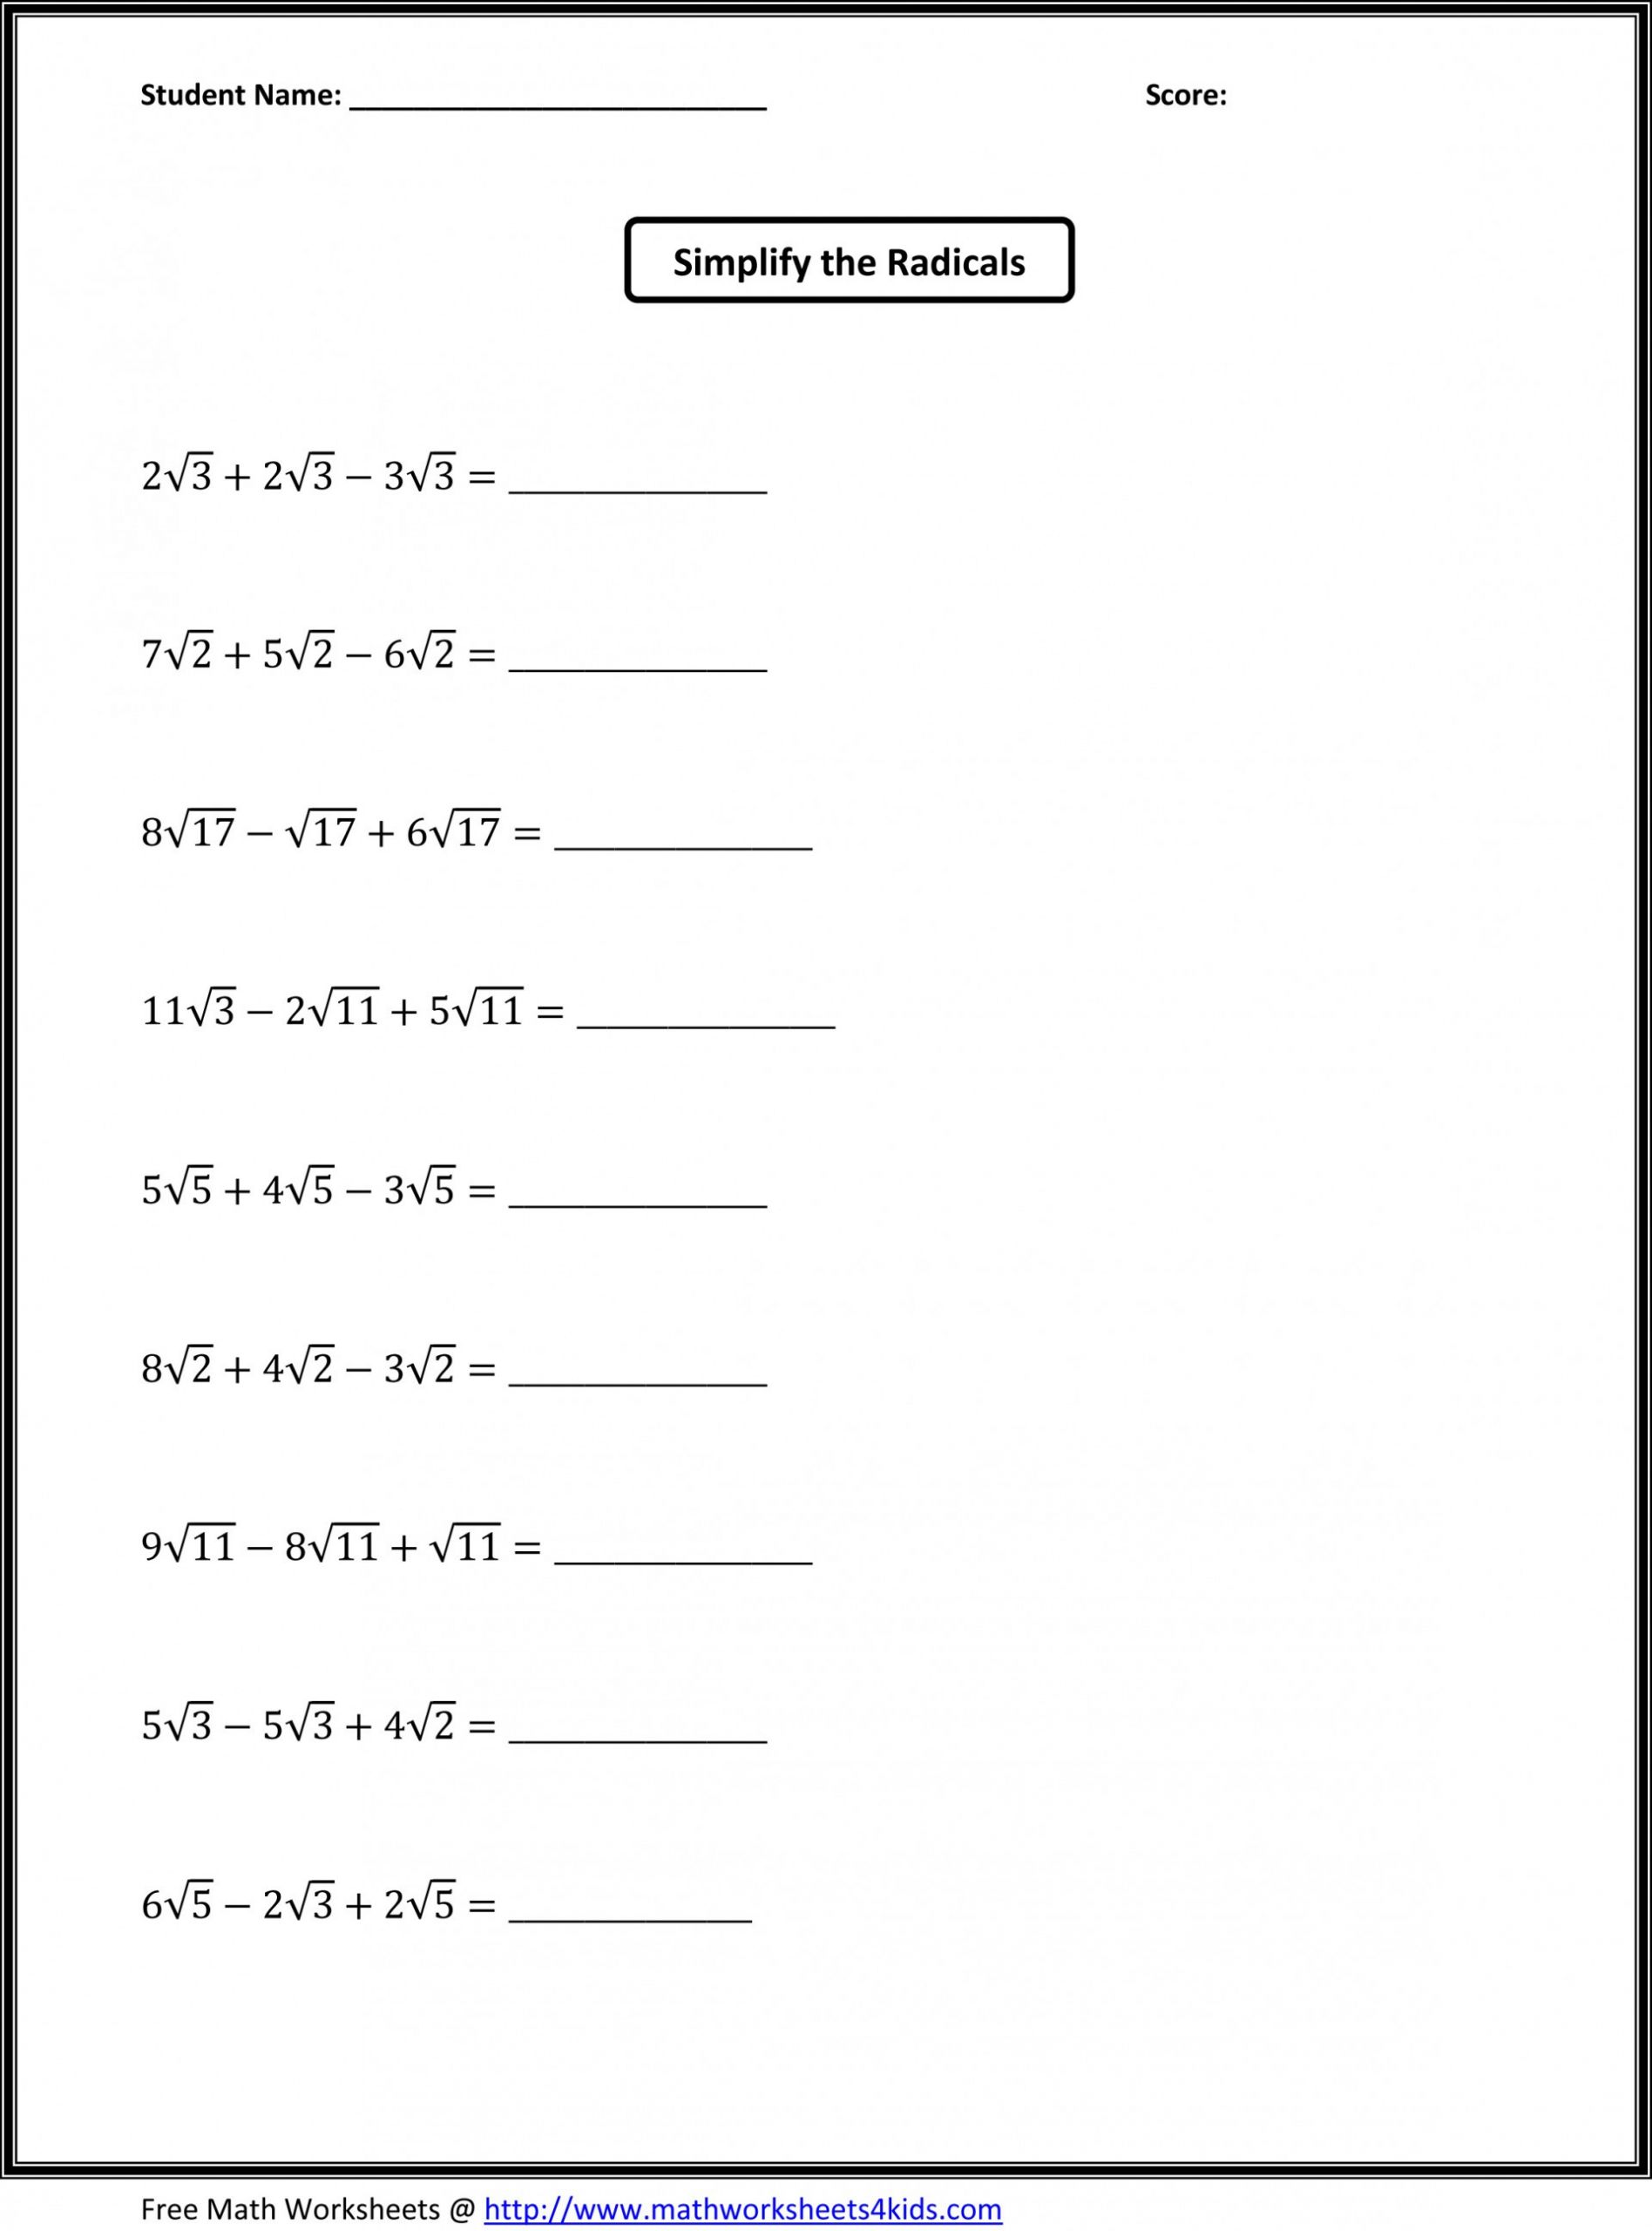 Free Math Worksheets First Grade 1 Counting Money Counting Money Dimes Quarters